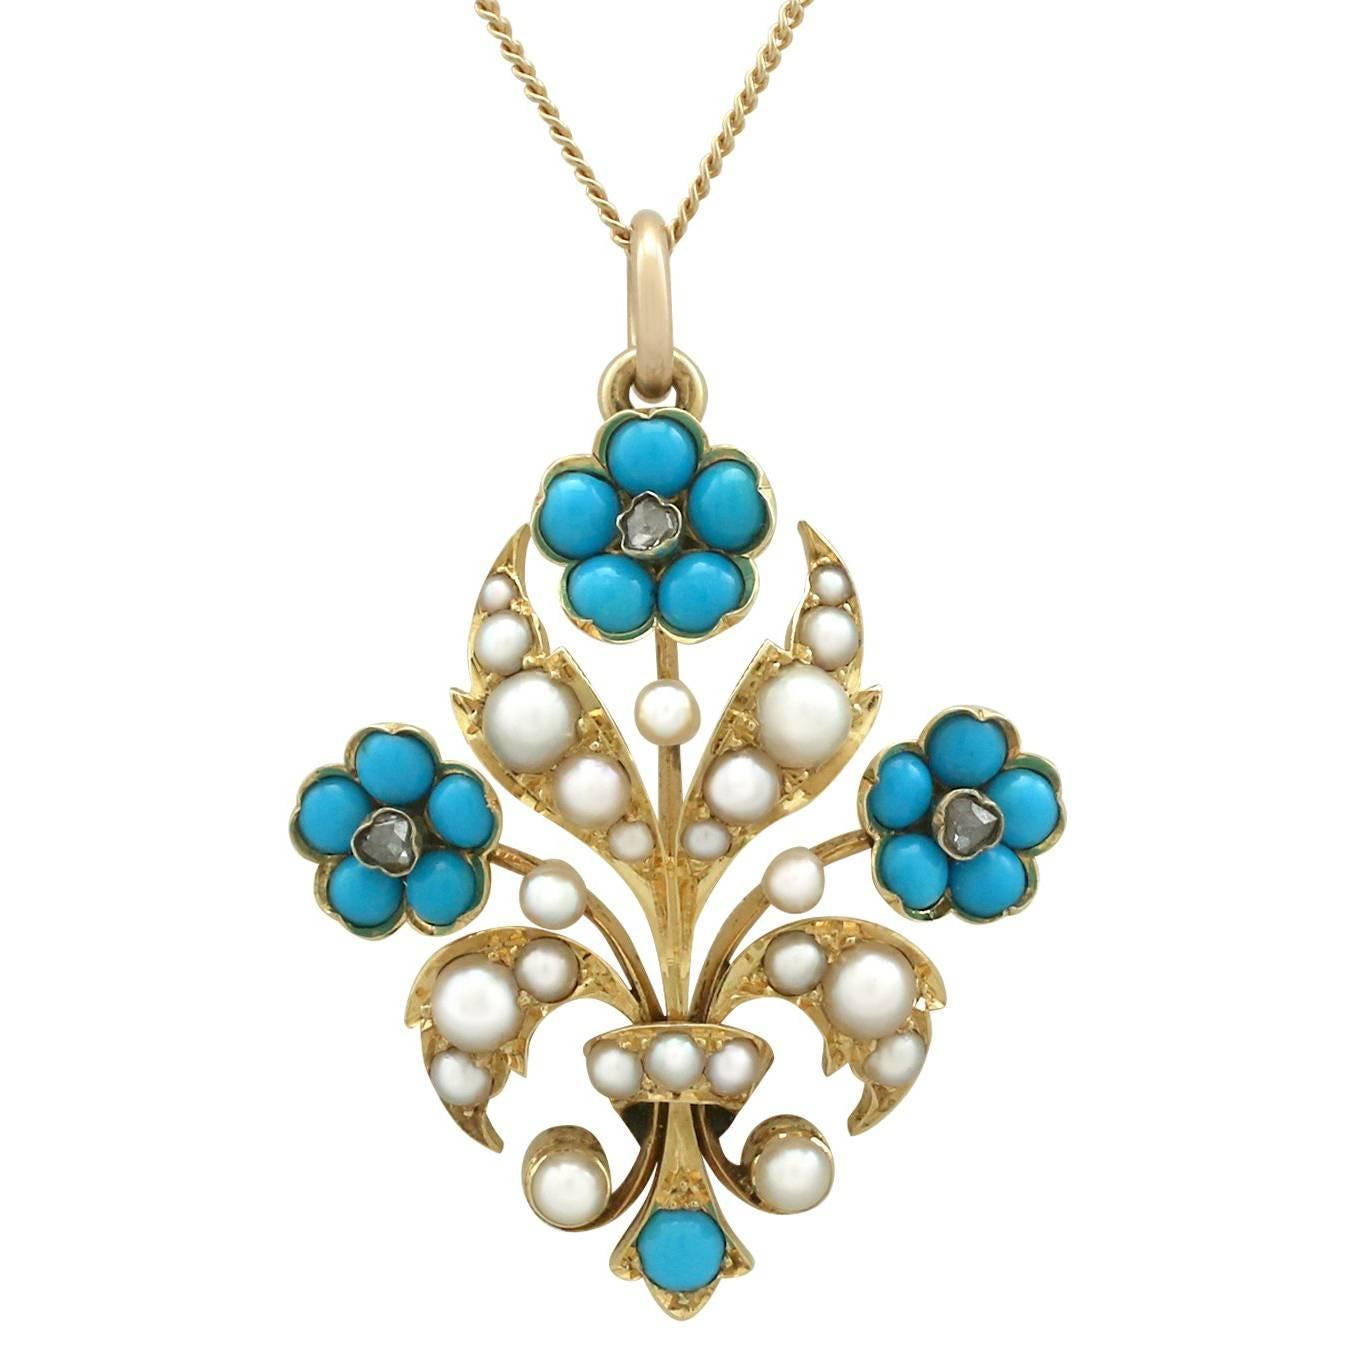 Antique Victorian Turquoise, Seed Pearl, Diamond and Yellow Gold Pendant